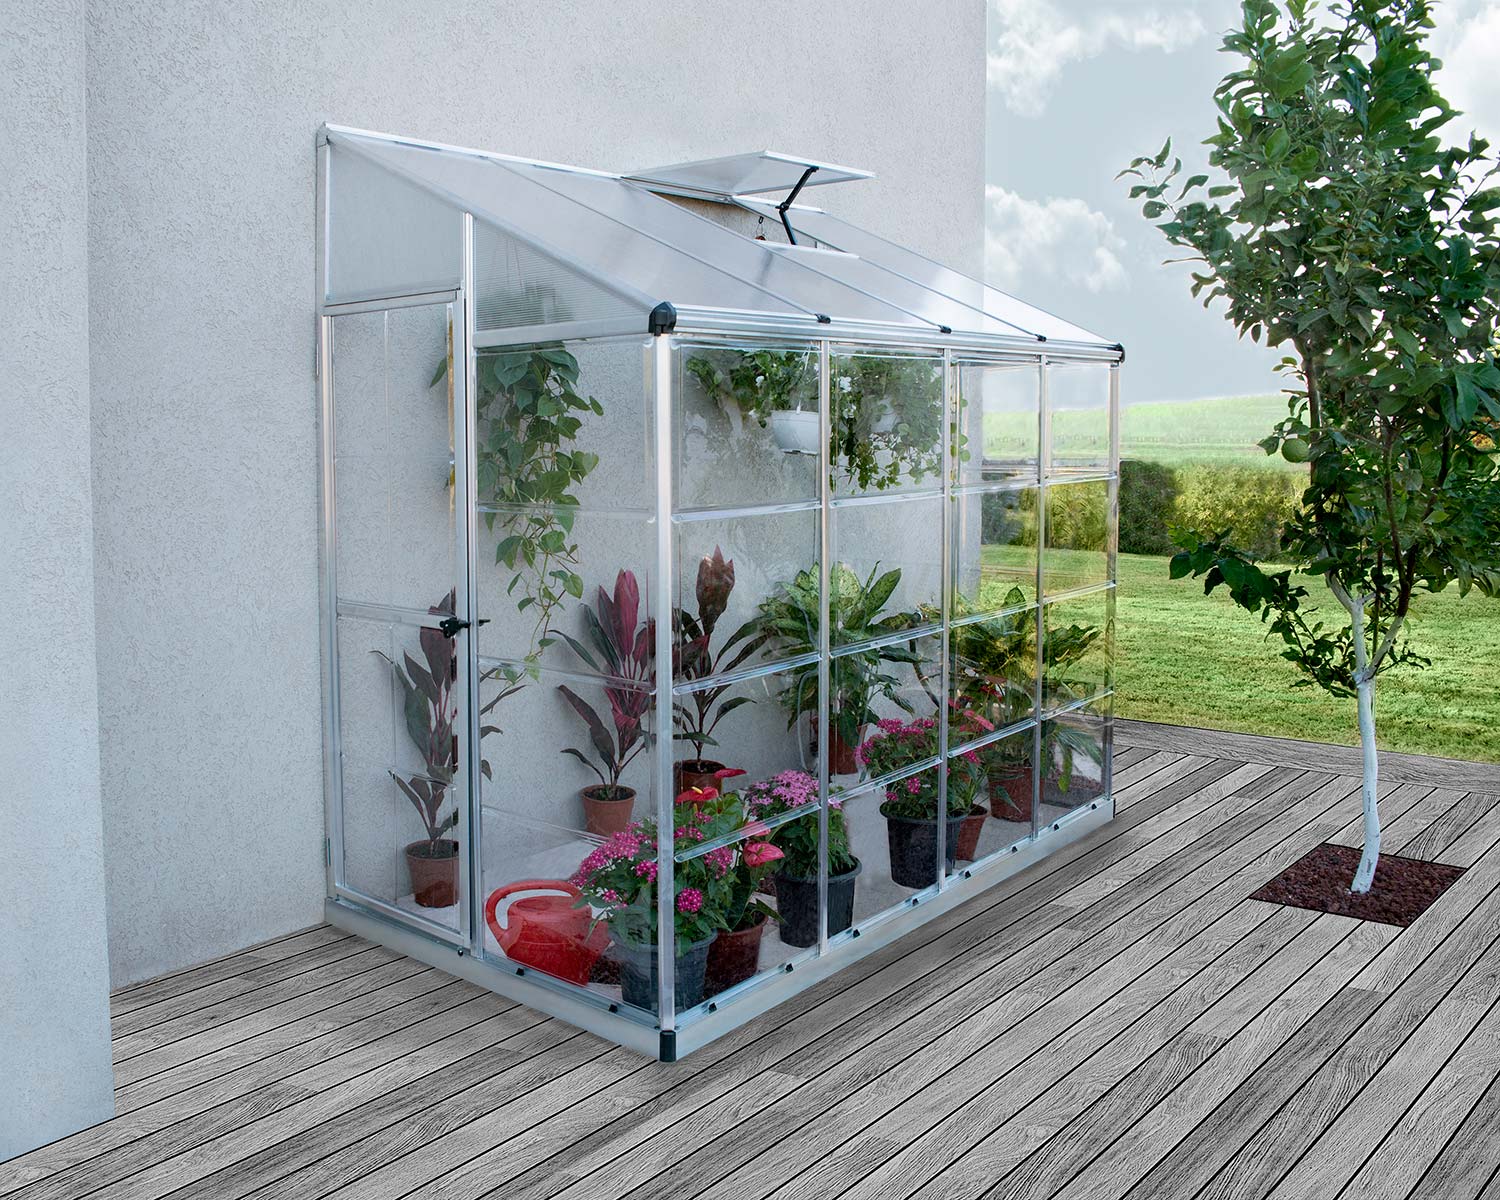 Lean To Greenhouse 8' x 4' Kit - Silver Structure & Polycarbonate Panels